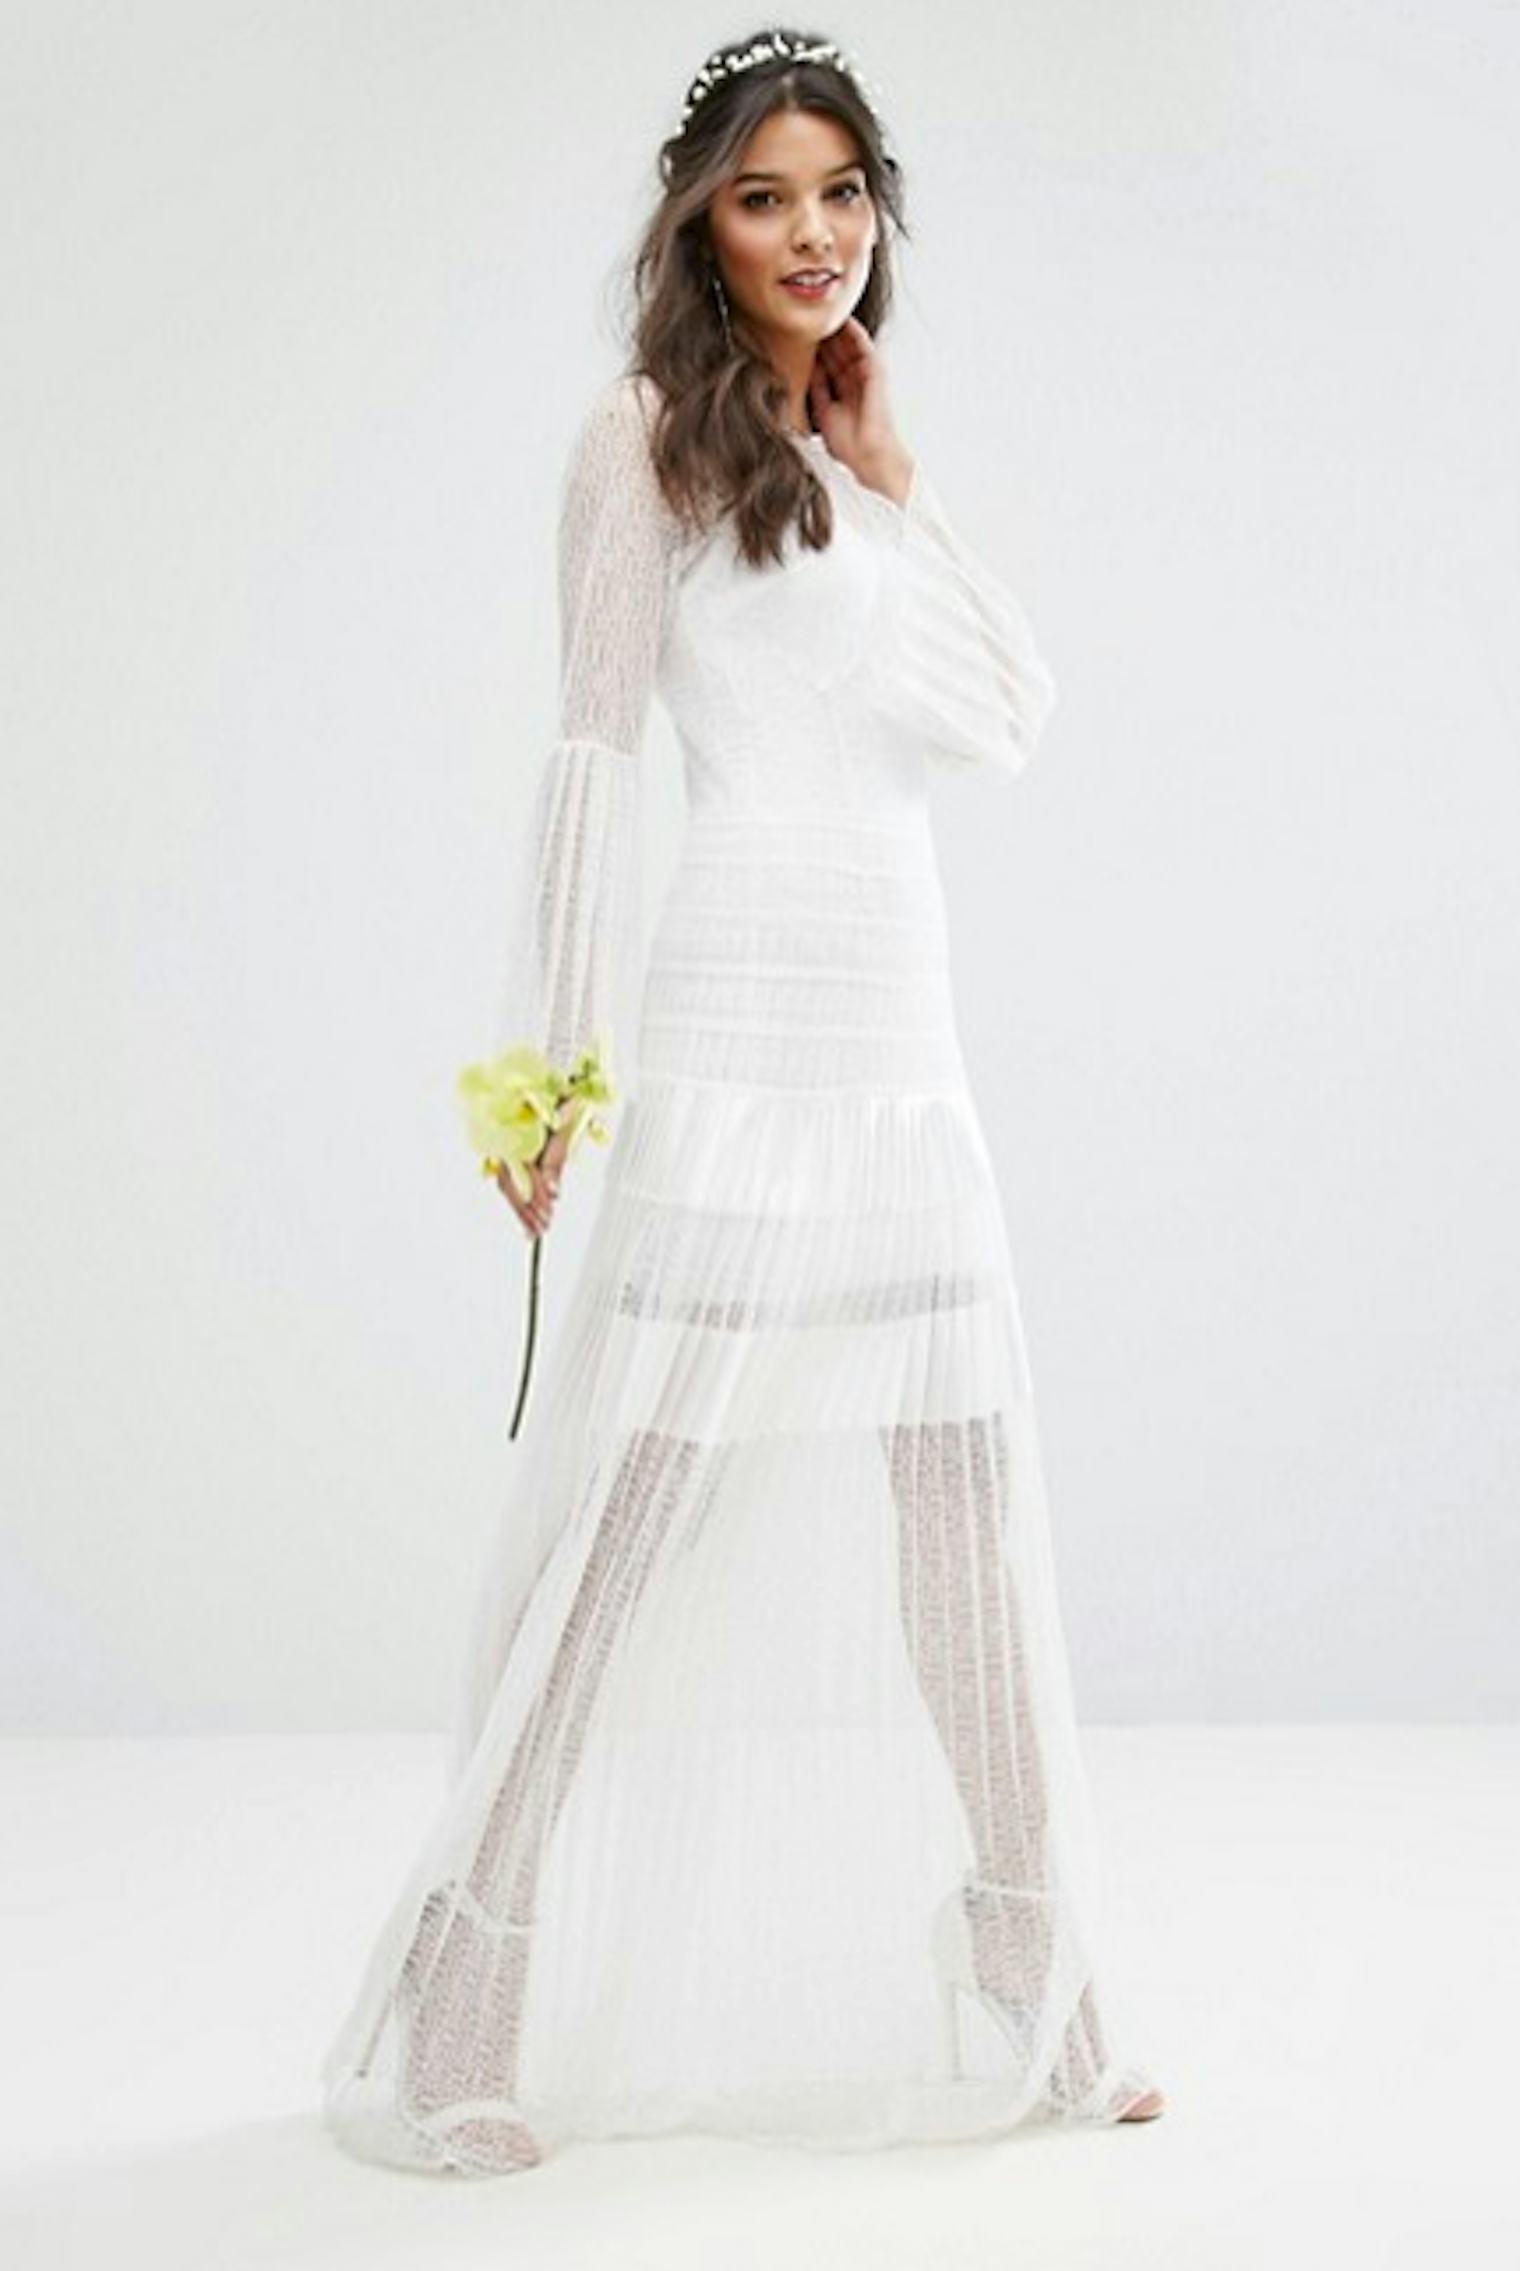 11 Wedding Dresses With Sleeves That Will Make You Feel Like A Literal ...